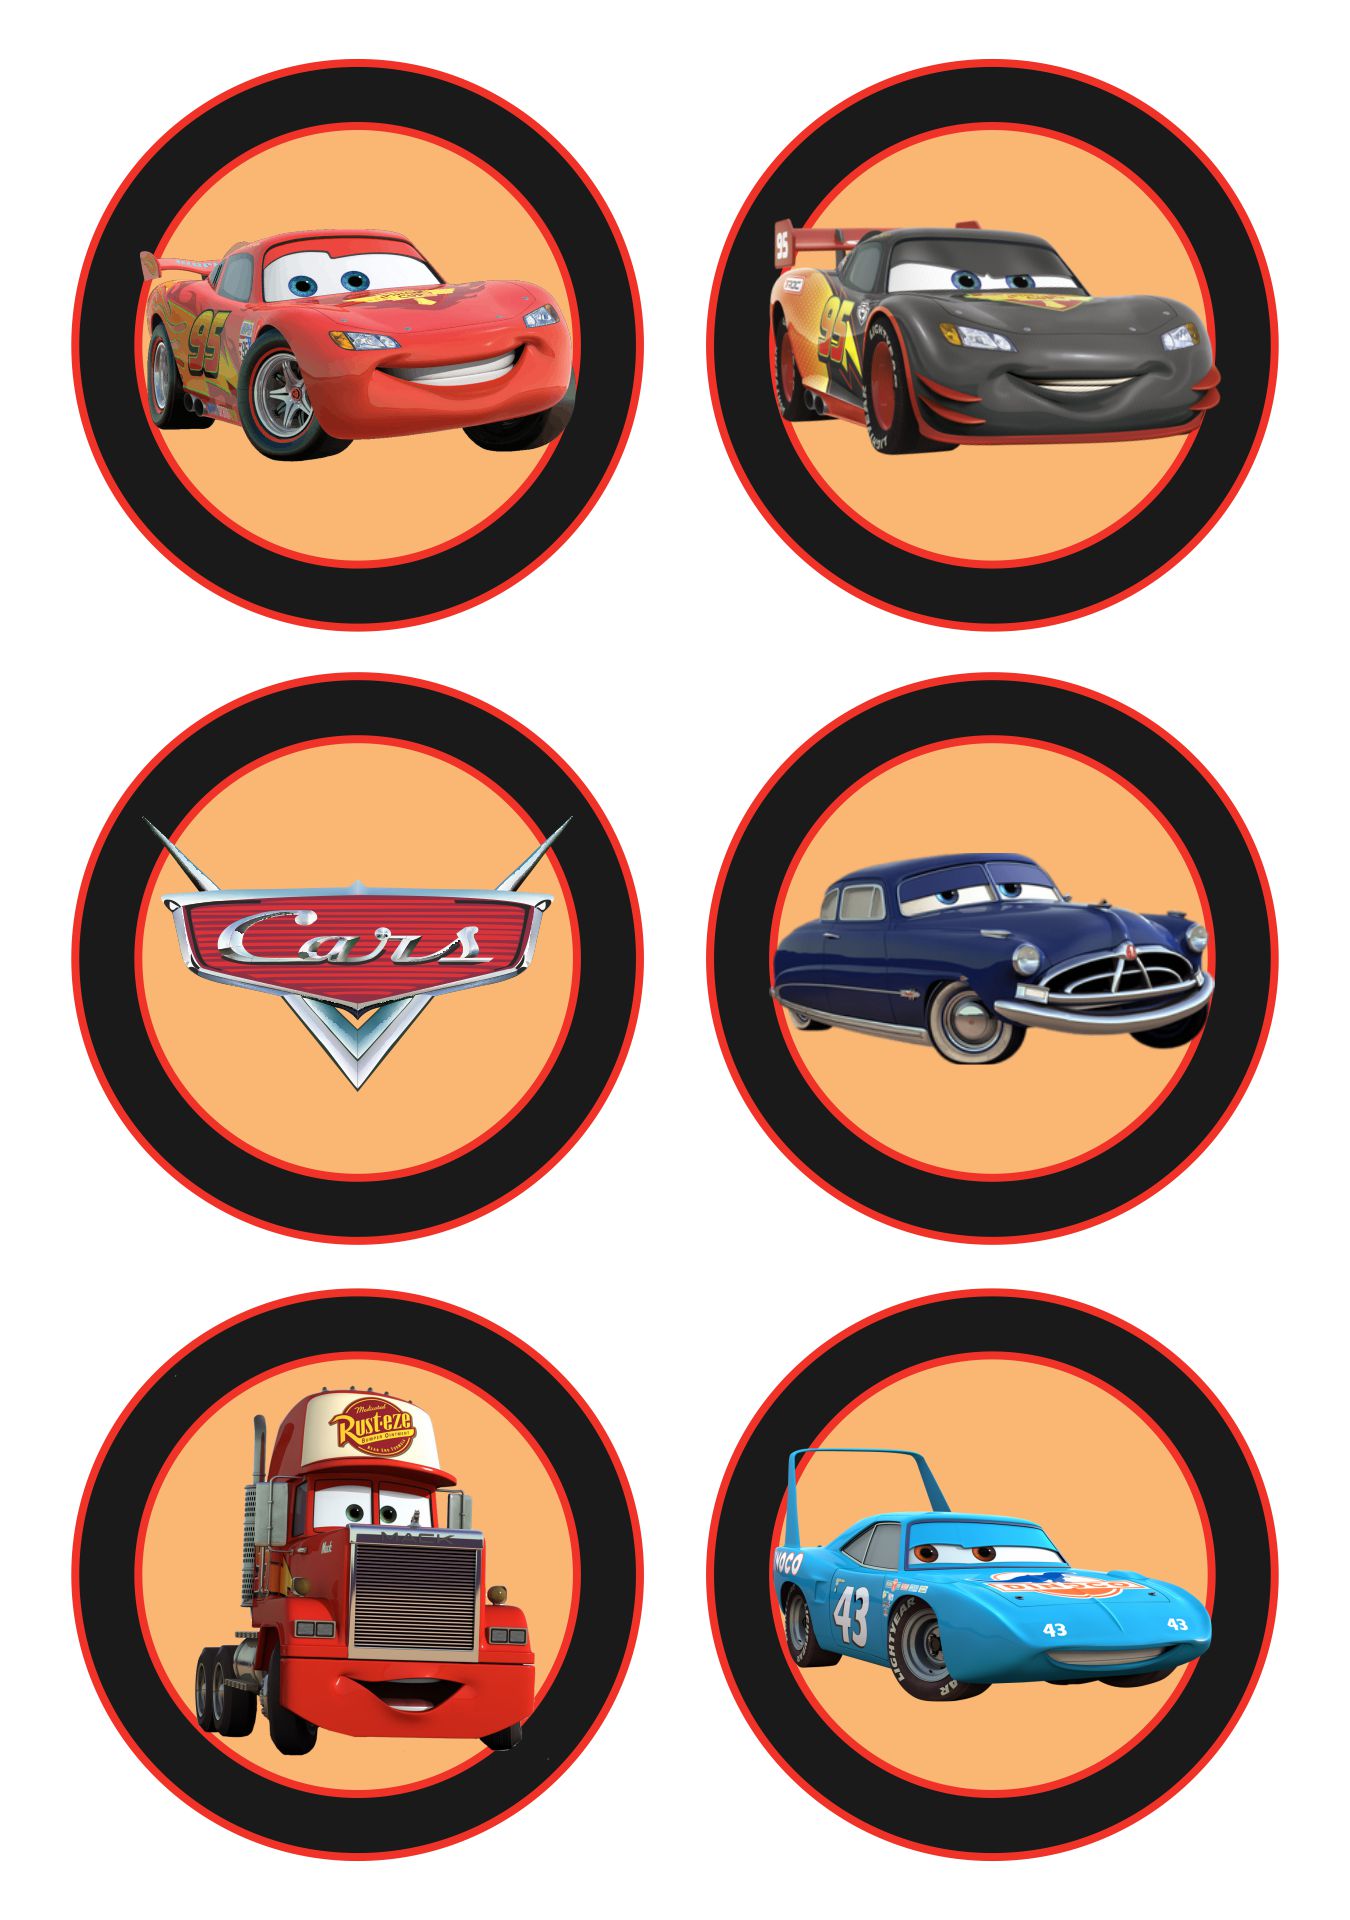 7-best-images-of-printable-disney-cars-cake-toppers-disney-cars